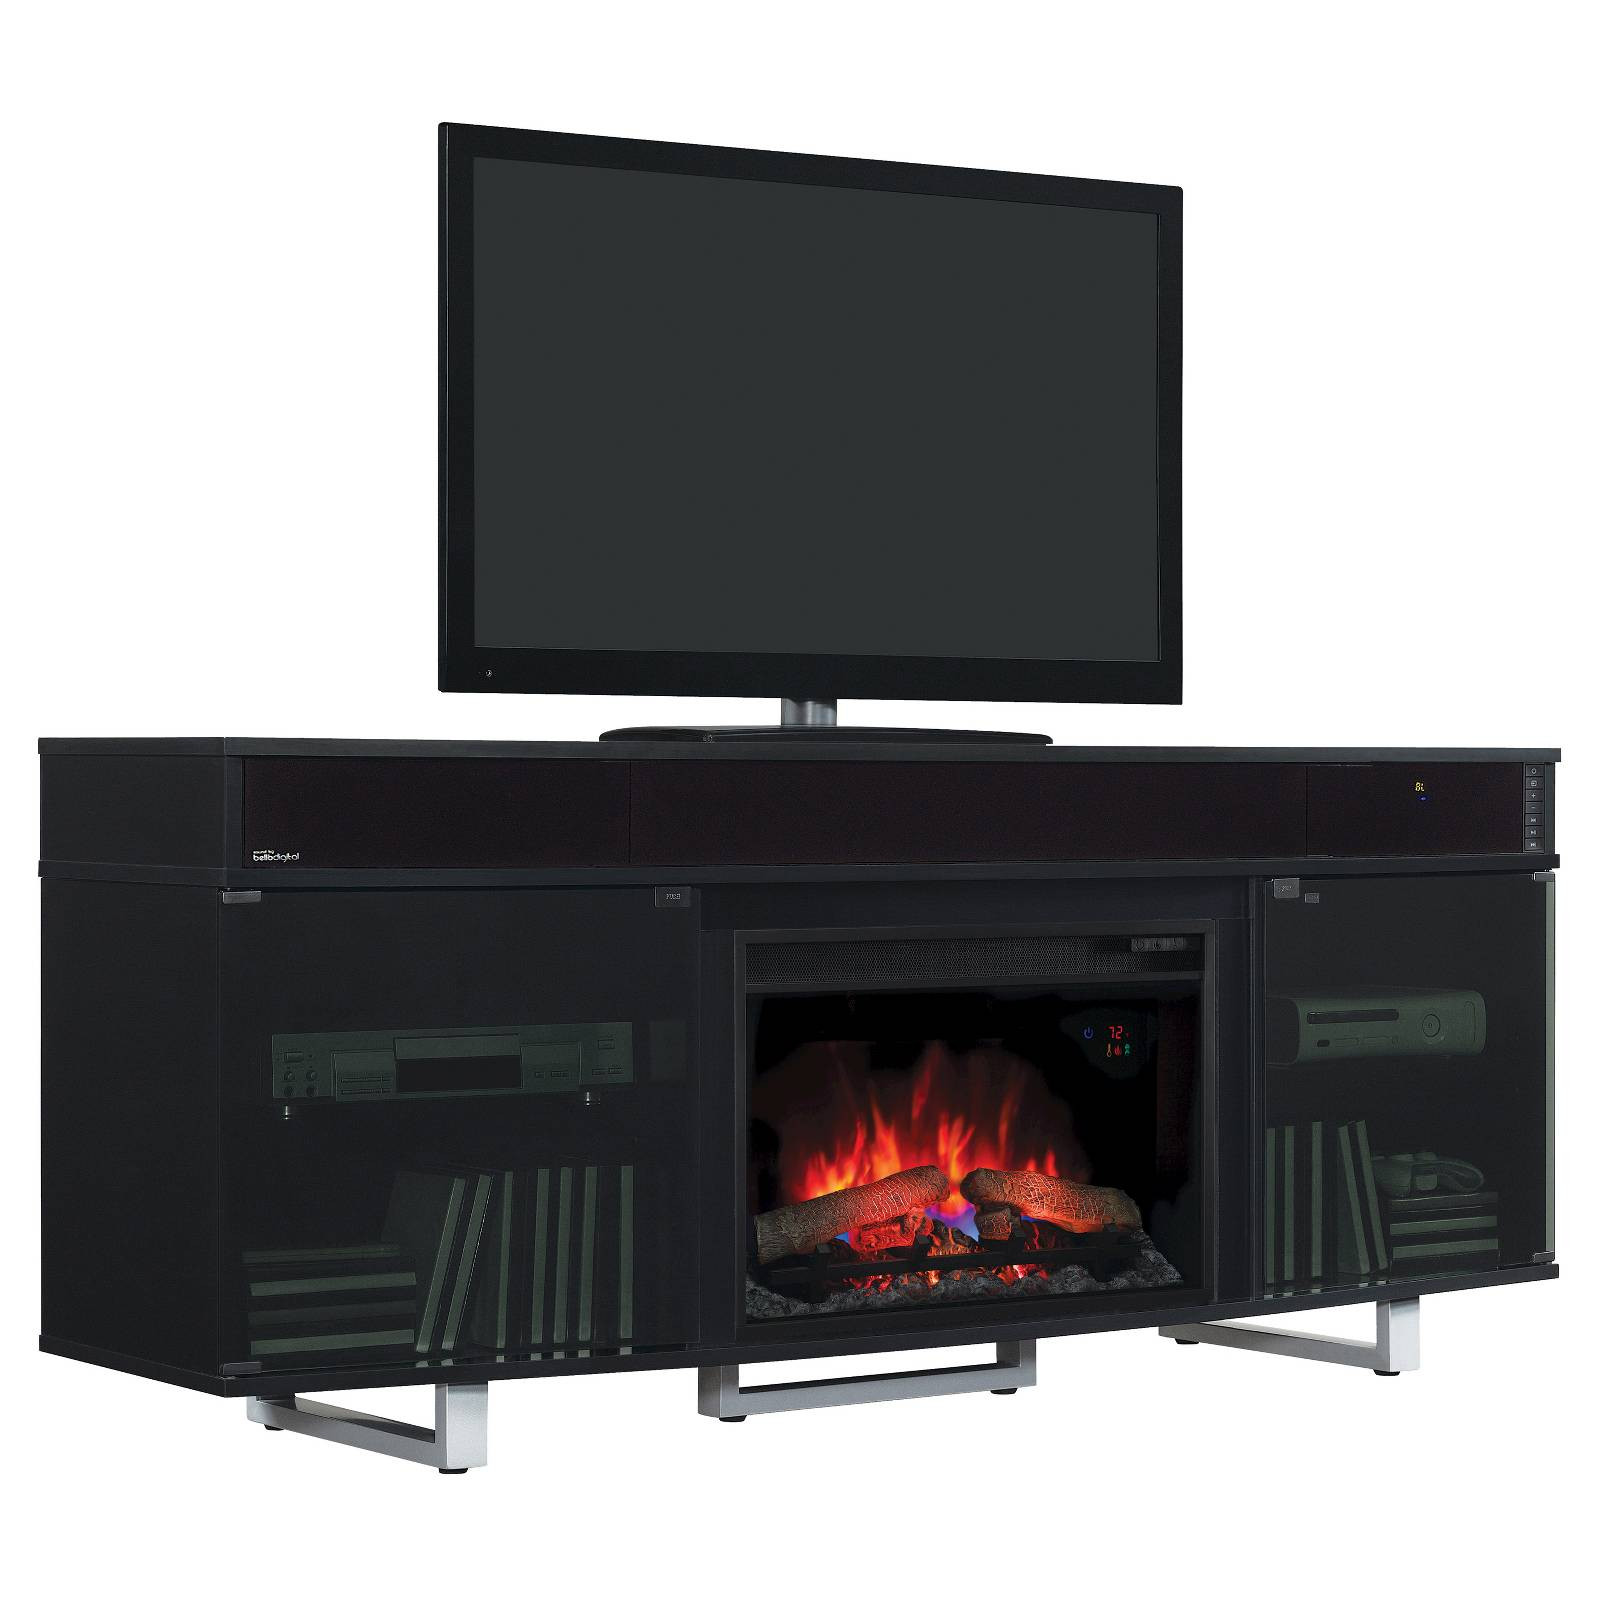 Target Electric Fireplace
 Enterprise TV Stand with Speakers and Electric Fireplace